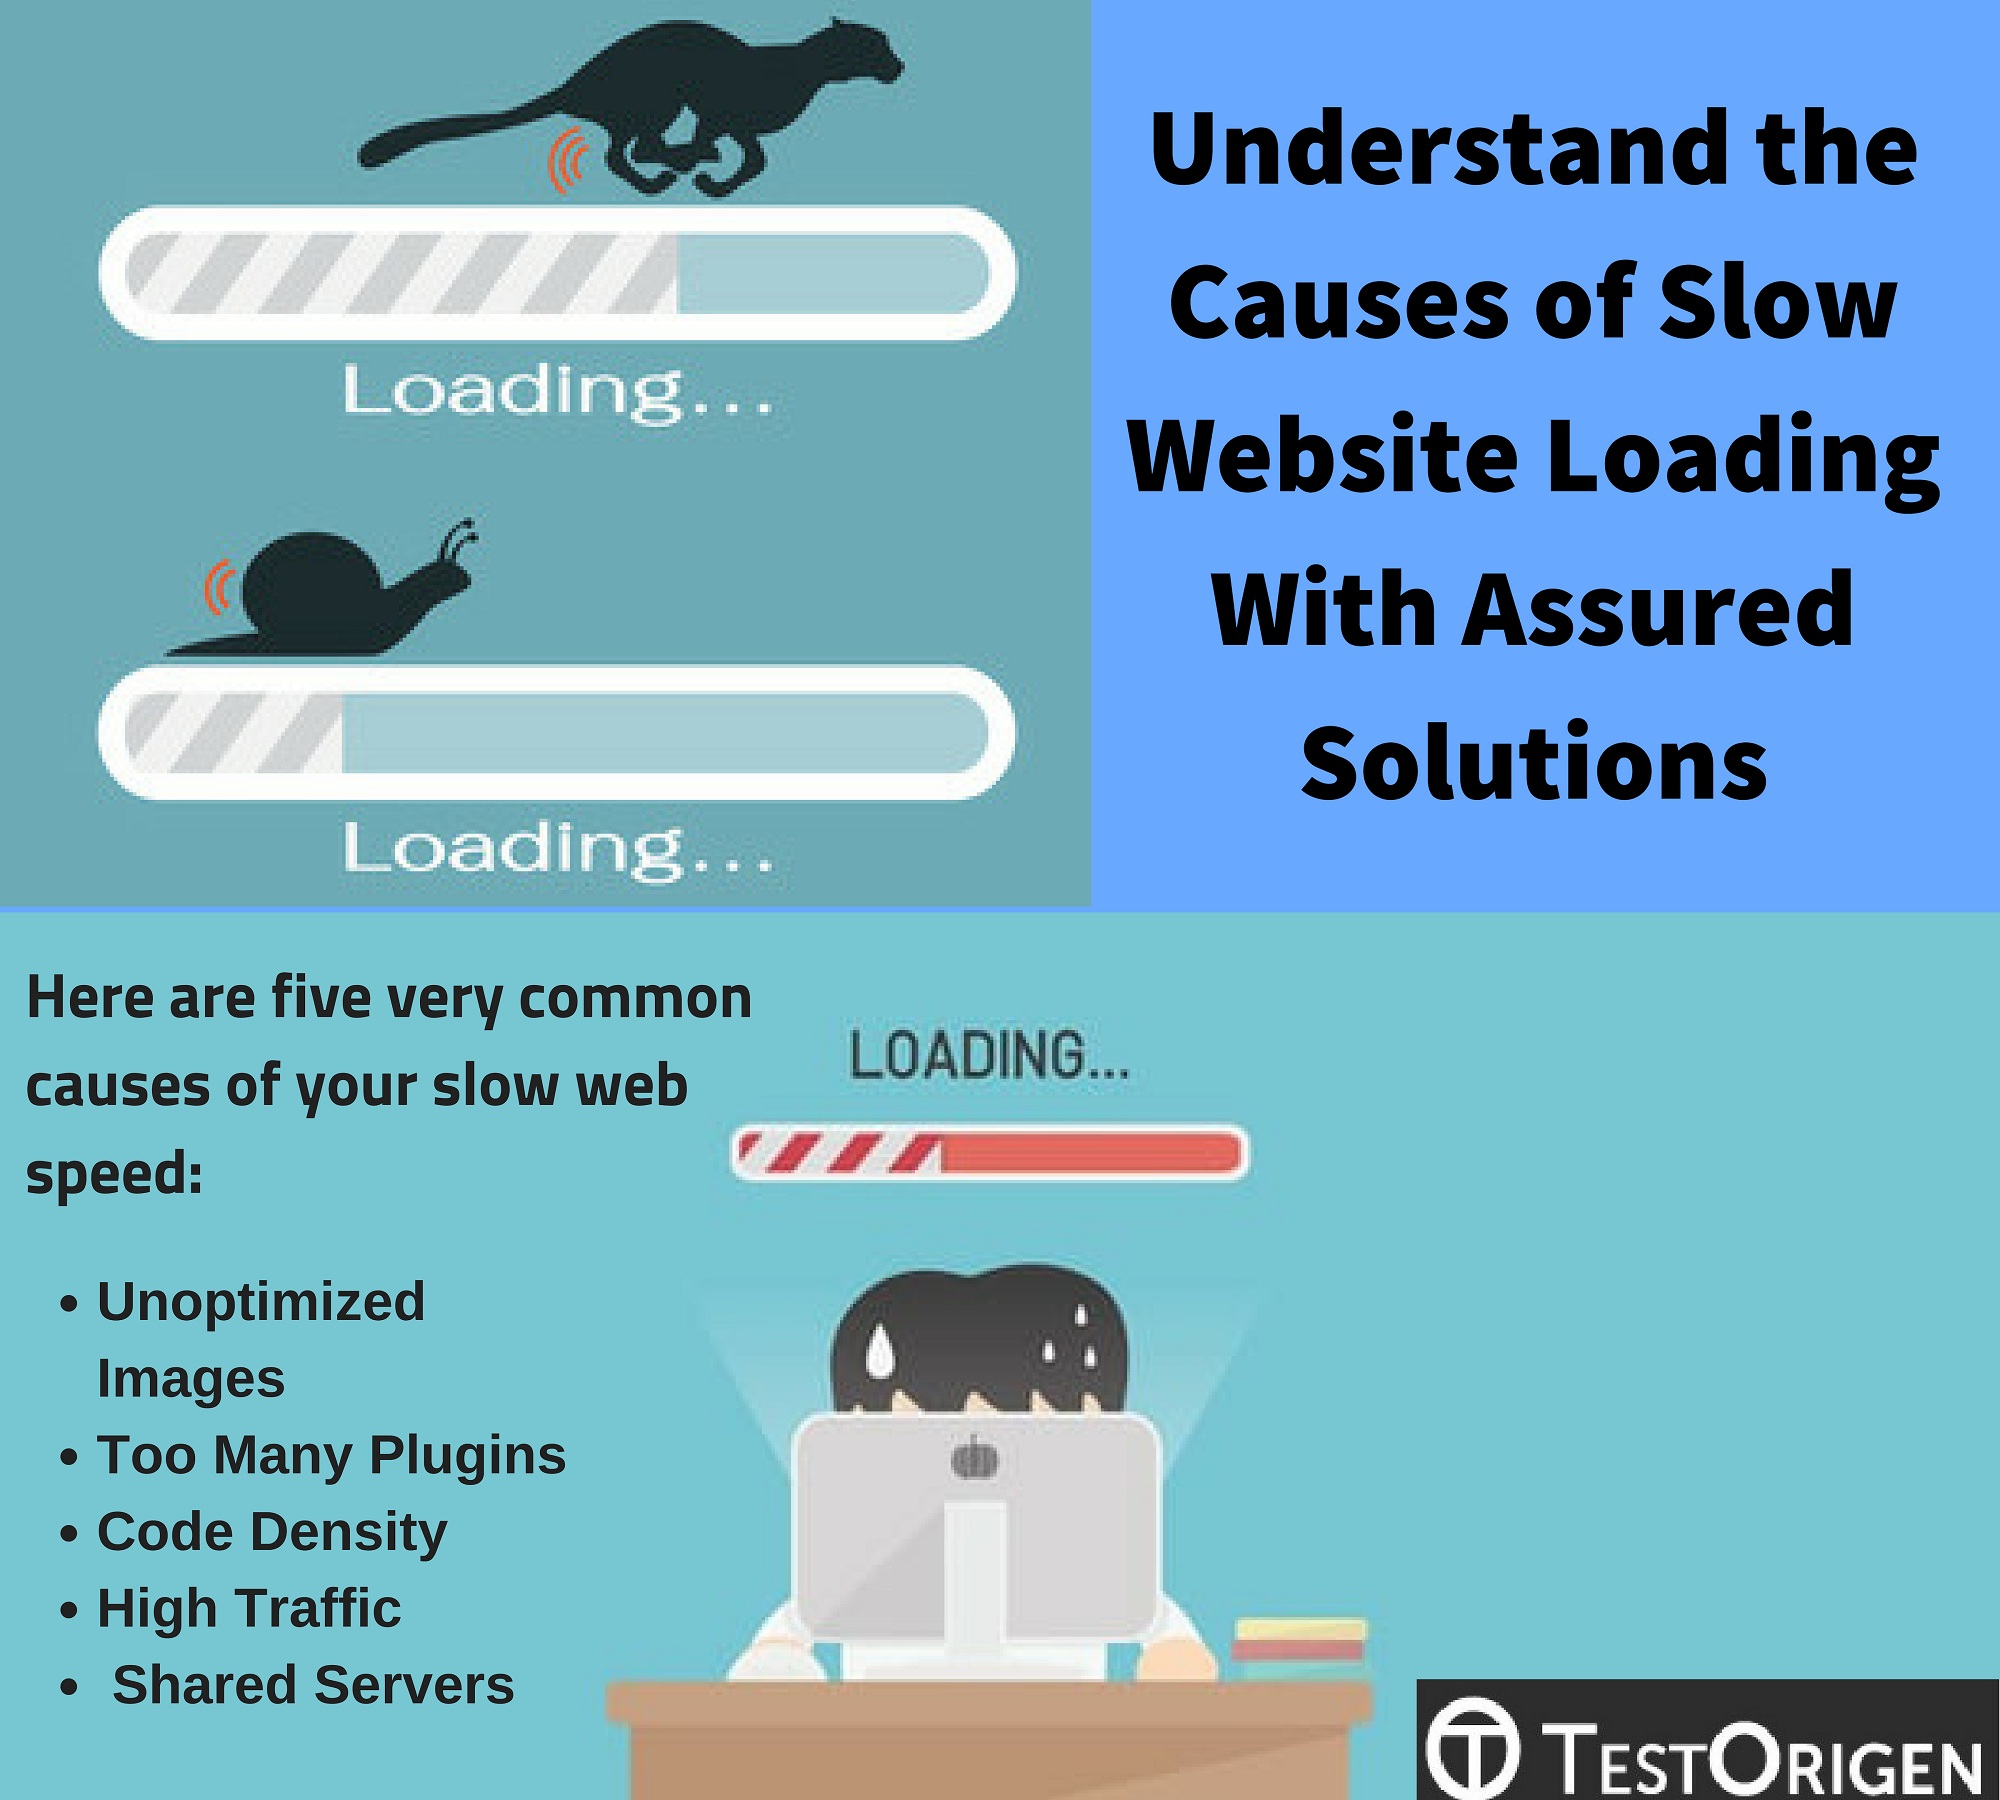 Understand the Causes of Slow Website Loading With Assured Solutions